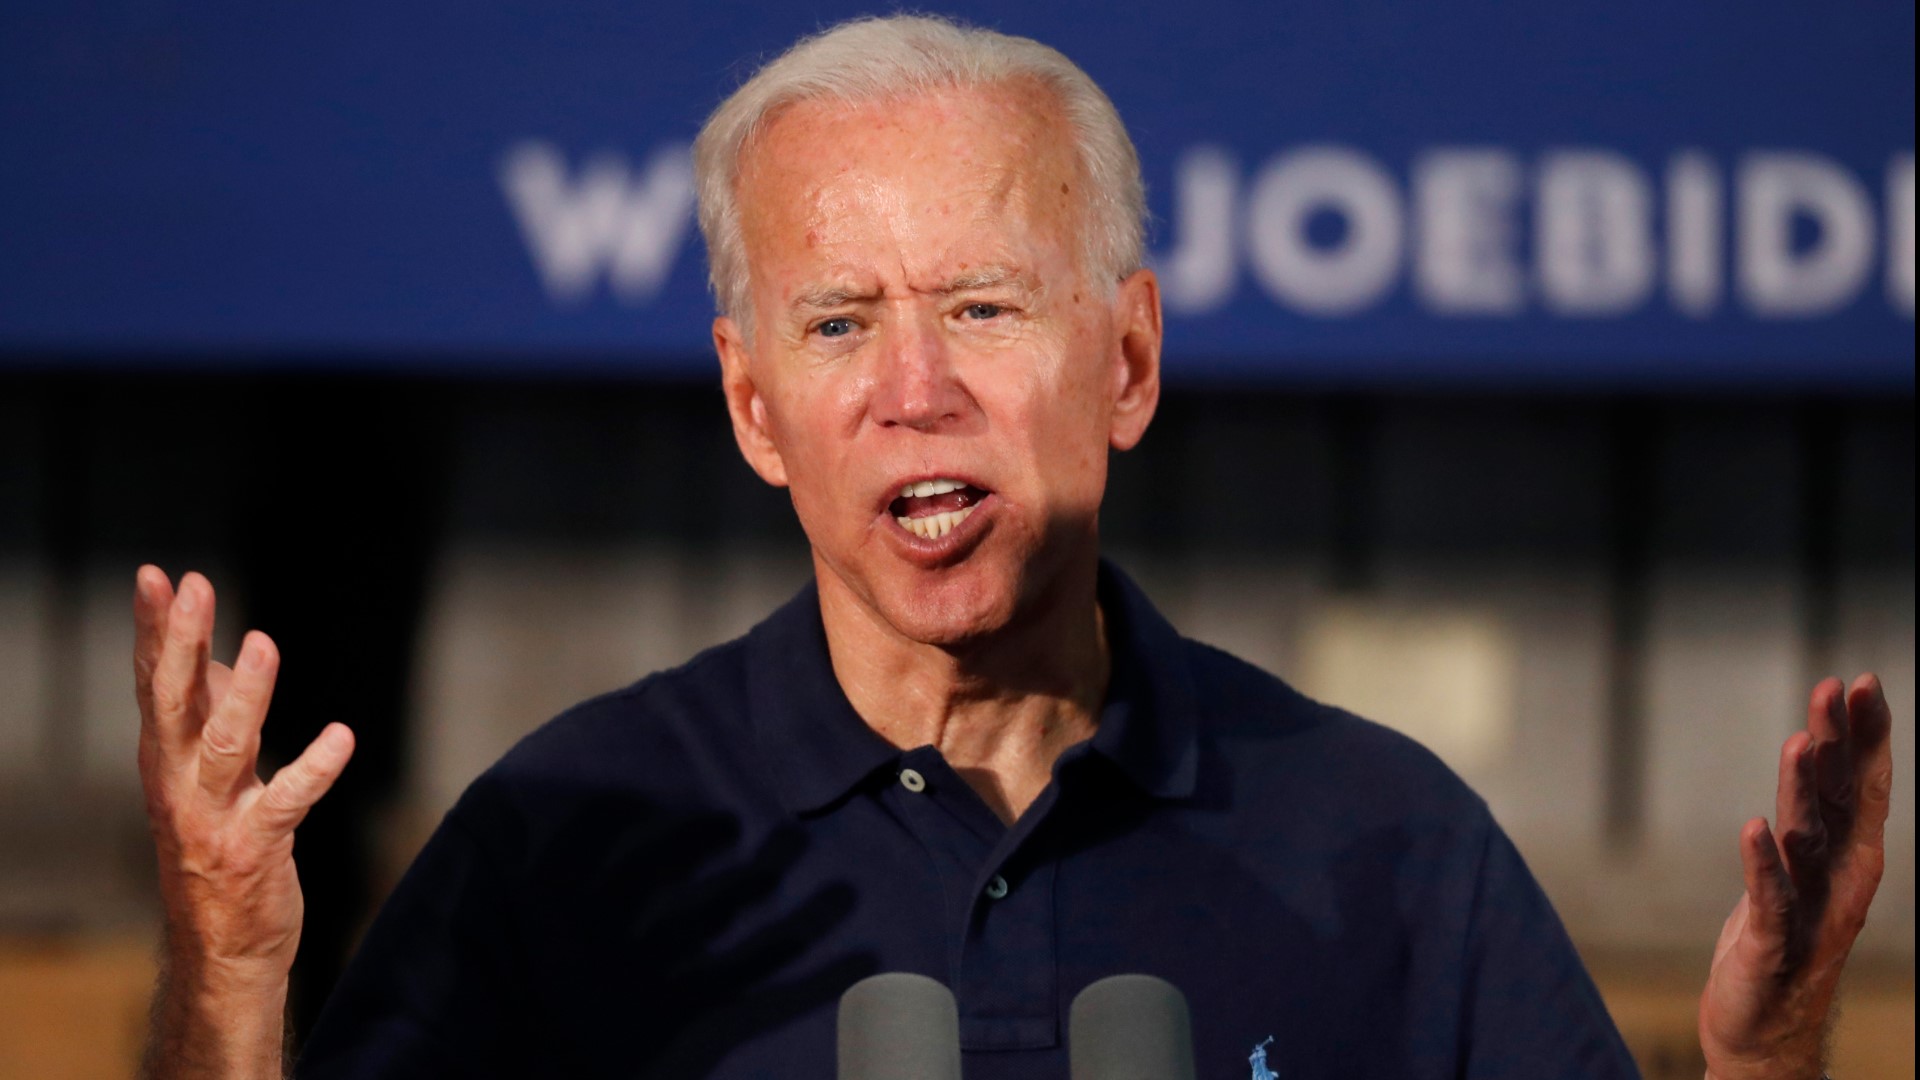 The Biden campaign announced the rally will take place at Cherry Health on 100 Cherry Street SE, beginning at 10 a.m. The event will not be open to the public.